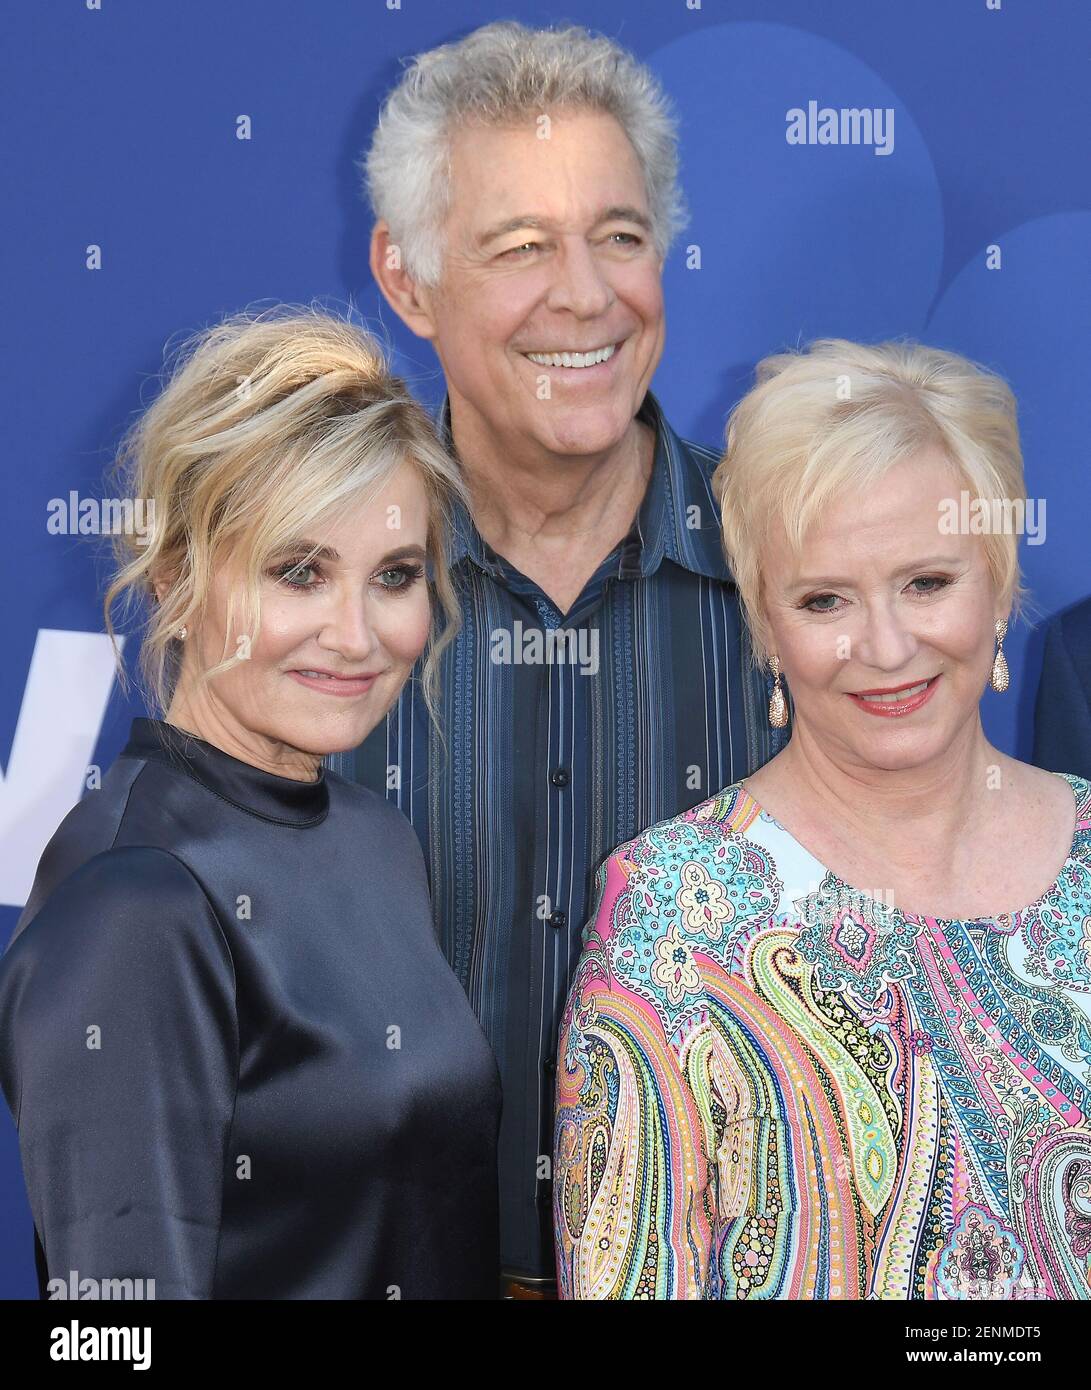 L-R) Maureen McCormick, Barry Williams and Eve Plumb at HGTV's A VERY BRADY  RENOVATION Los Angeles Premiere held at The Garland Hotel in North  Hollywood, CA on Thursday, September 5, 2019. (Photo